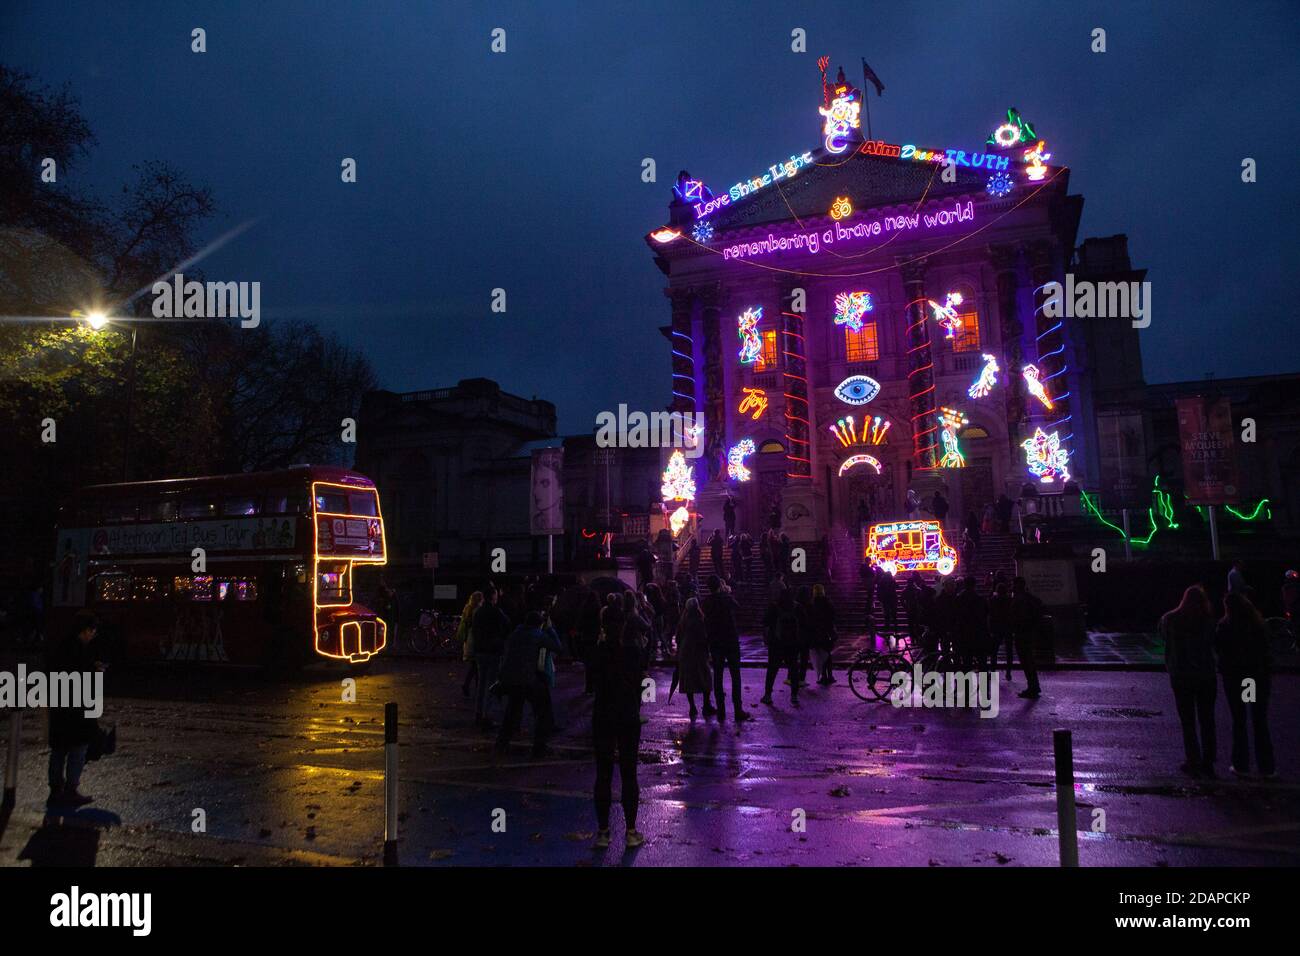 London, UK, 14 November 2020: despite some rain, Londoners flocked to see artist Chila Kumari Singh Burman's winter lights commission at Tate Britain, 'Remembering A Brave New World'. Some were marking the start of Diwali but others were just looking for any form of outdoor entertainment allowed under lockdown restrictions. Anna Watson/Alamy Live News Stock Photo